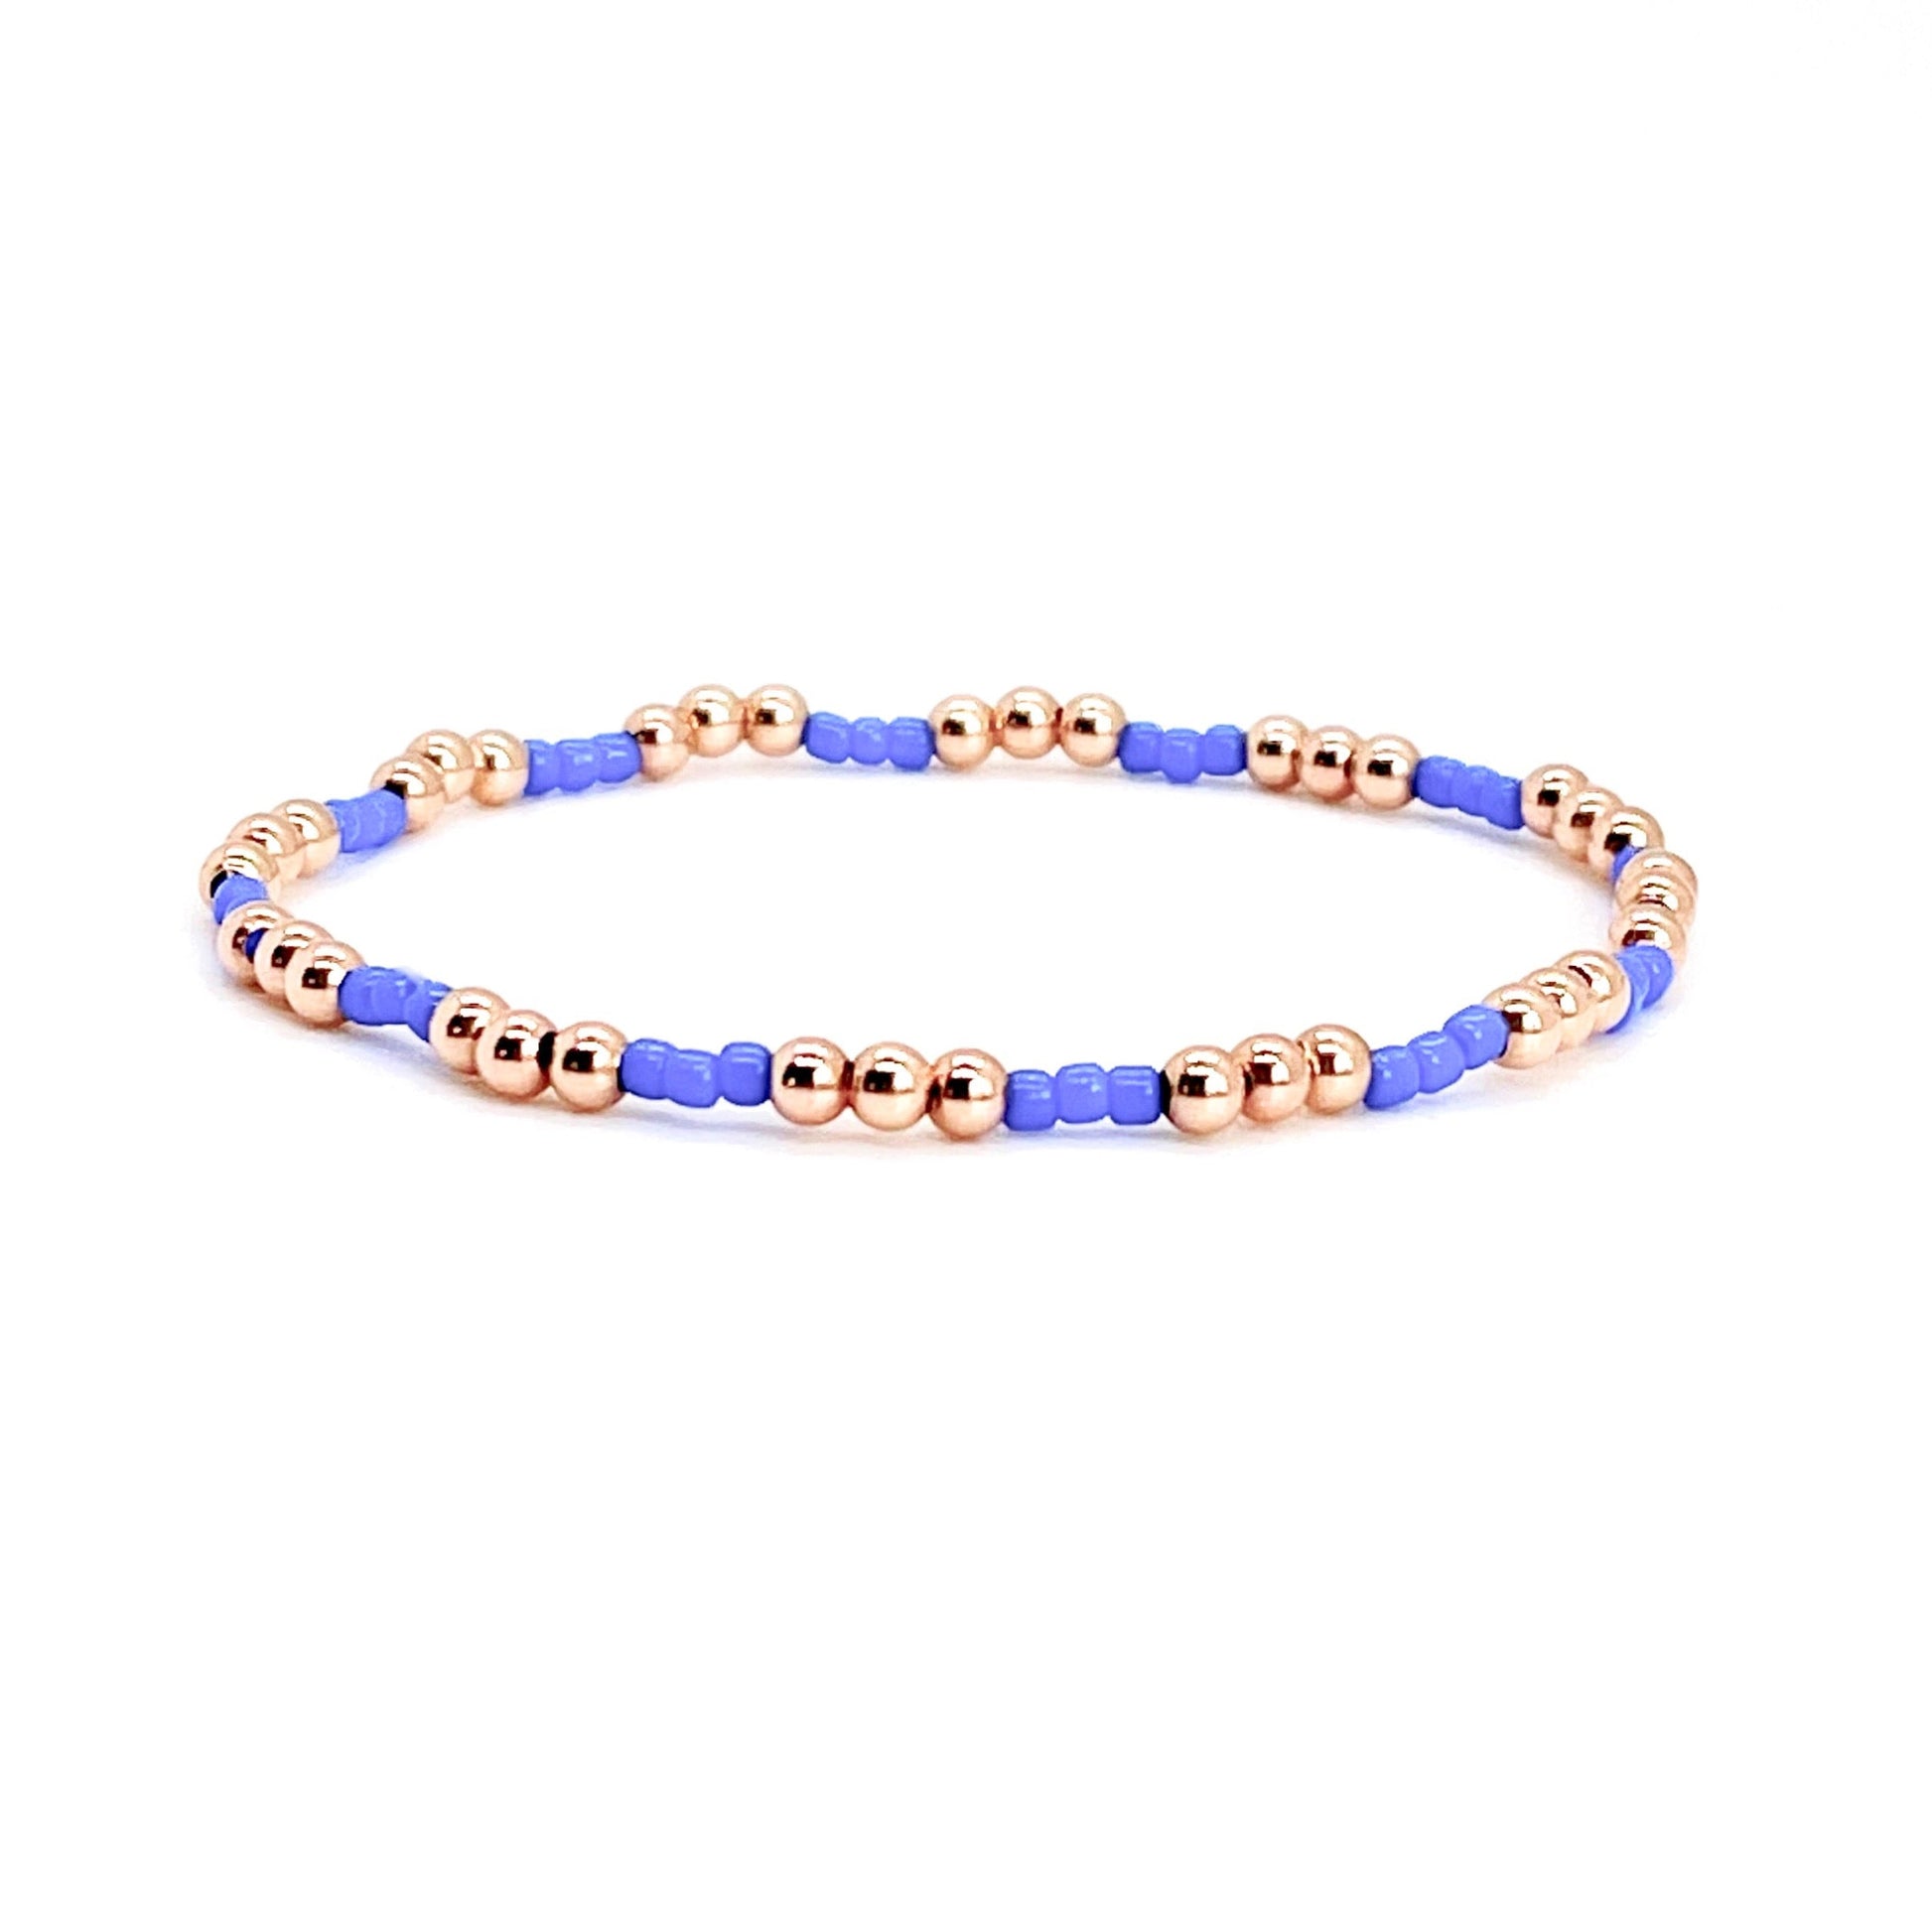 Rose gold bracelet for women with 3mm 14K beads and small seed beads on stretch cord.